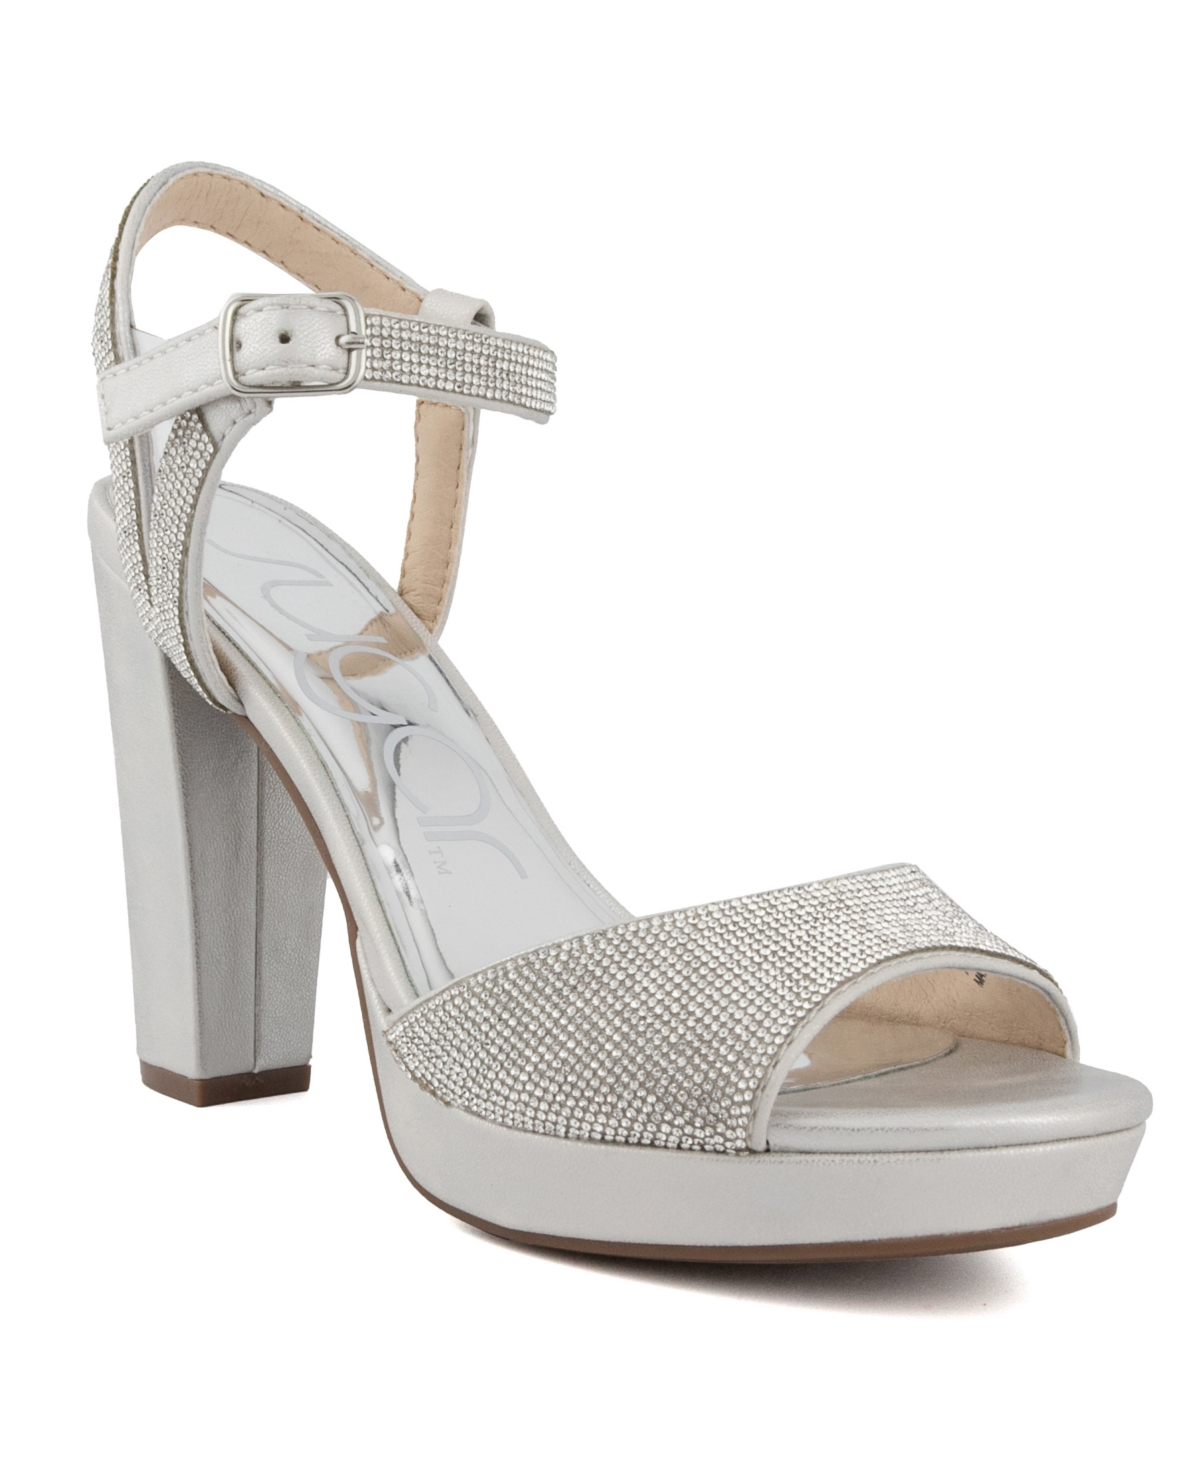 Women's Prisila High Heel Sandals - Silver Shimmer Fabric